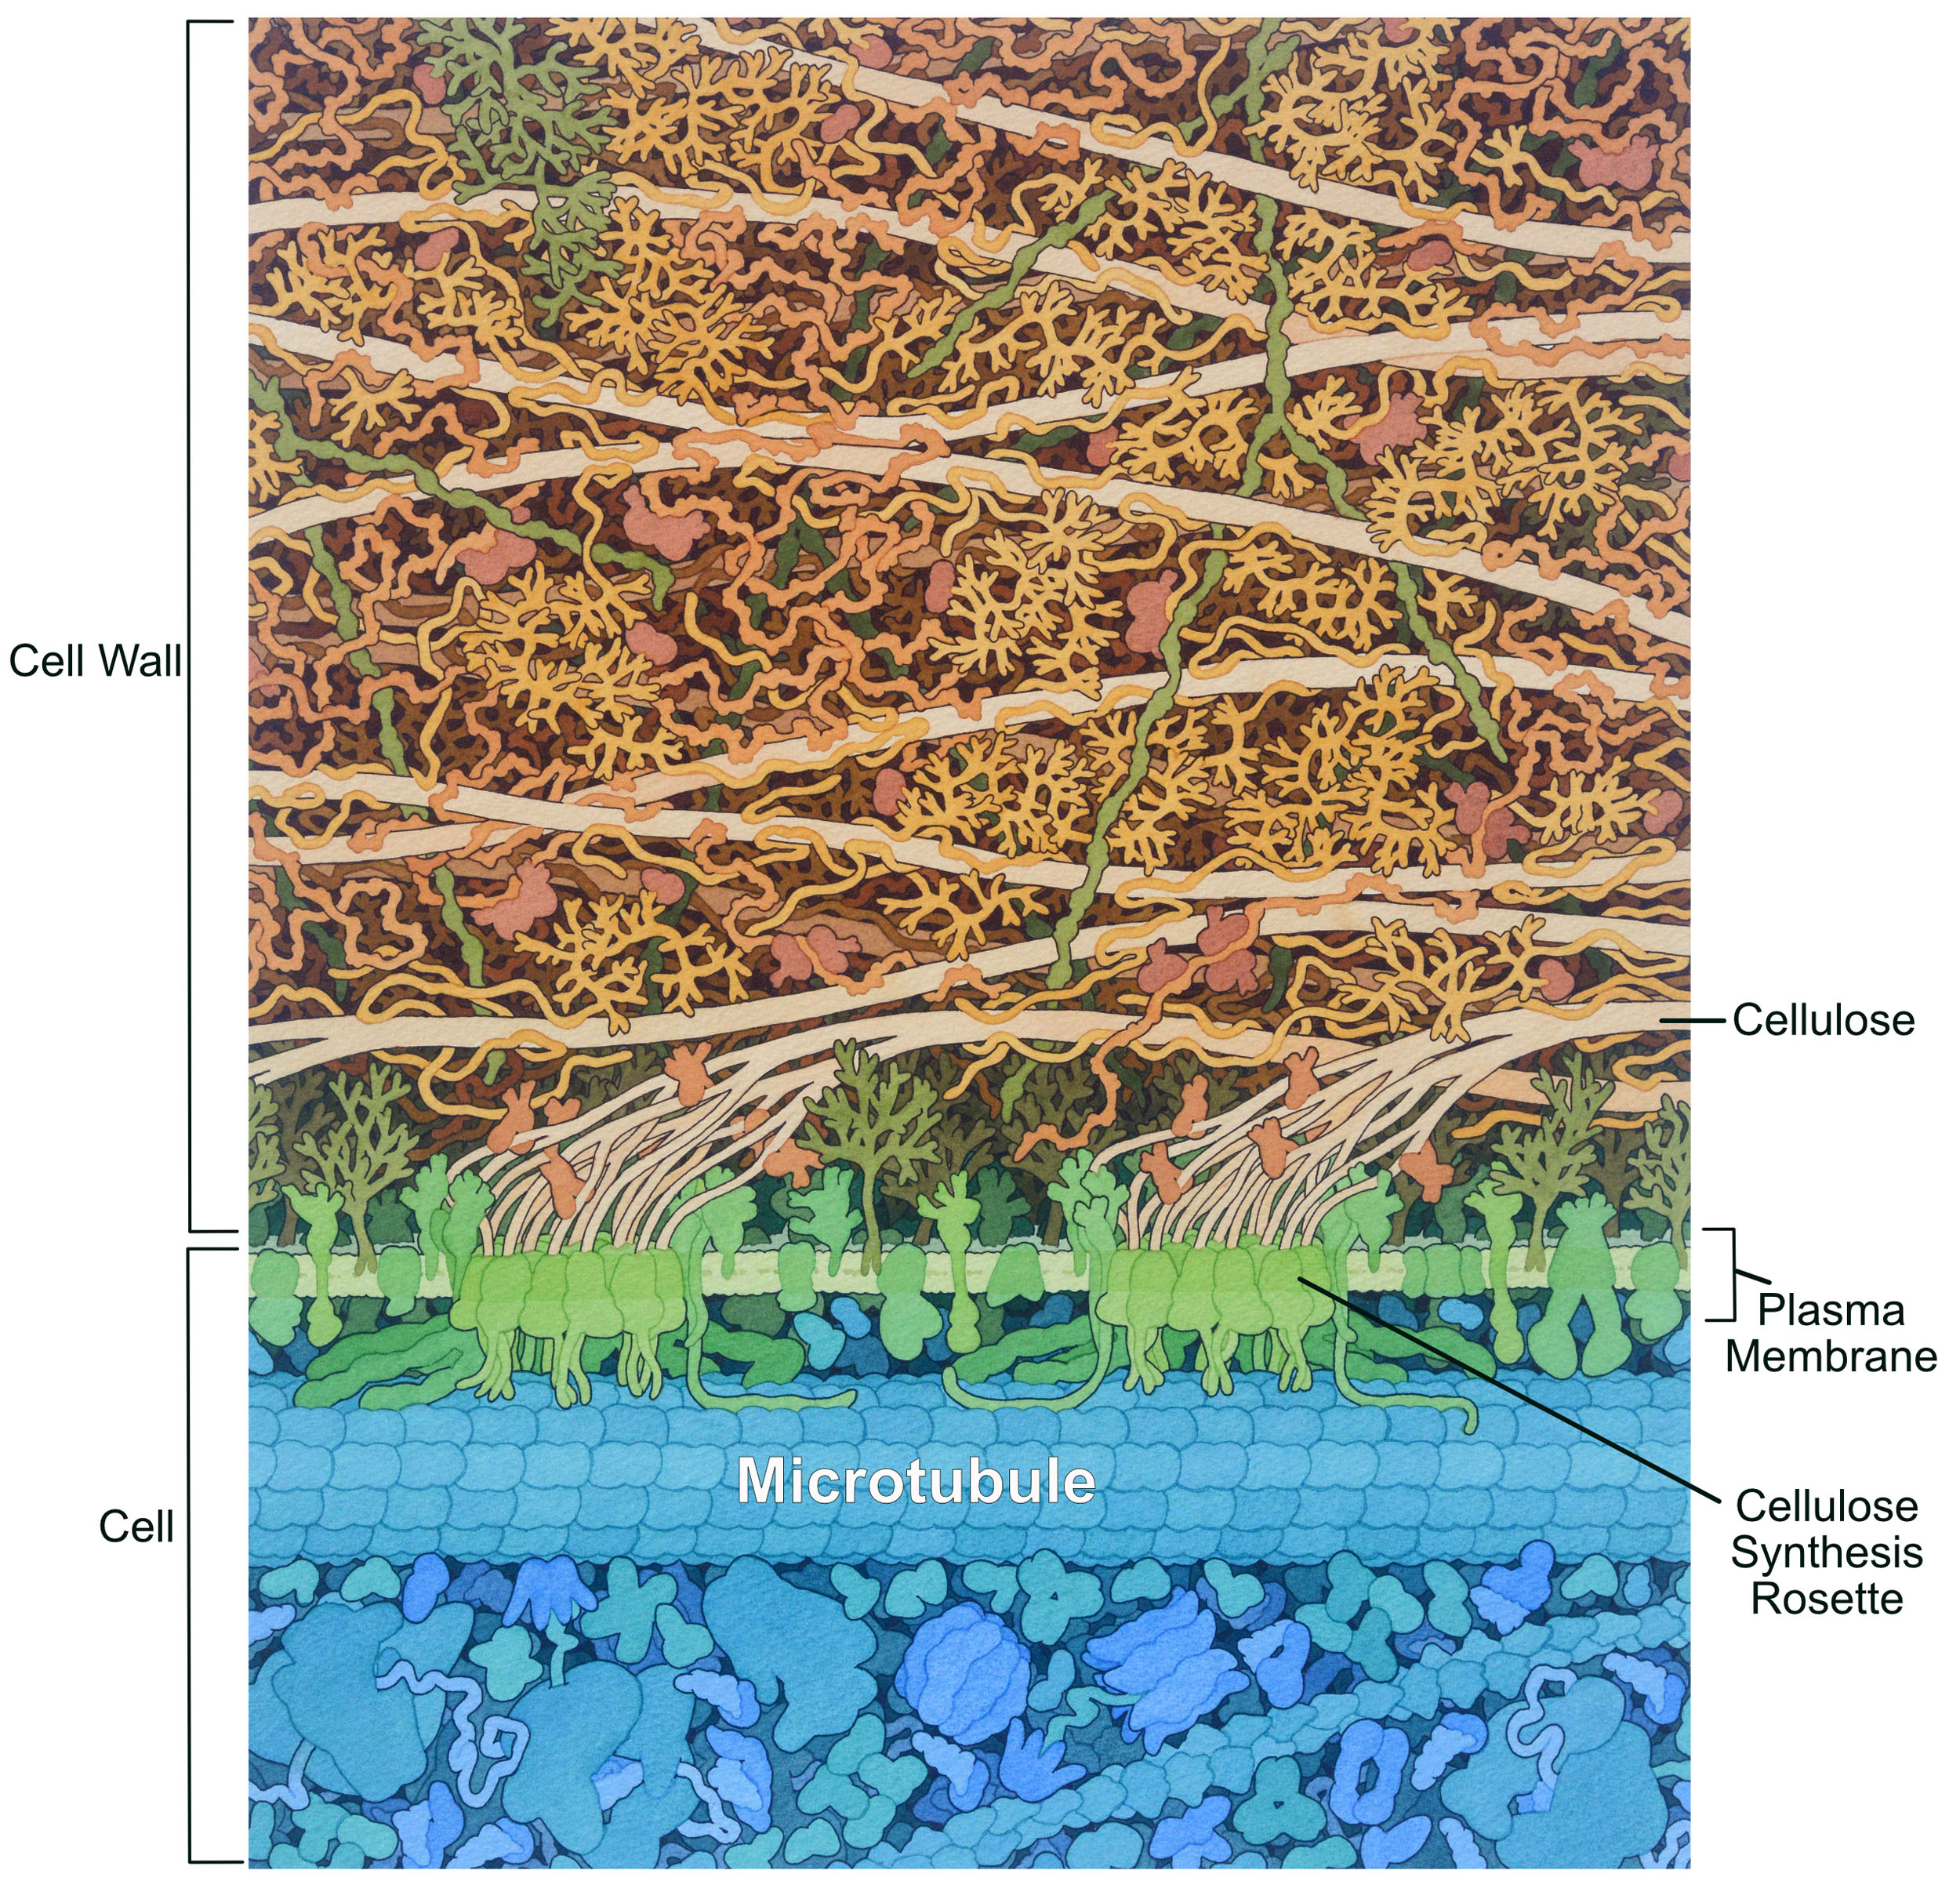 Artist’s rendition of the plant cell wall, and it’s underlying cell.